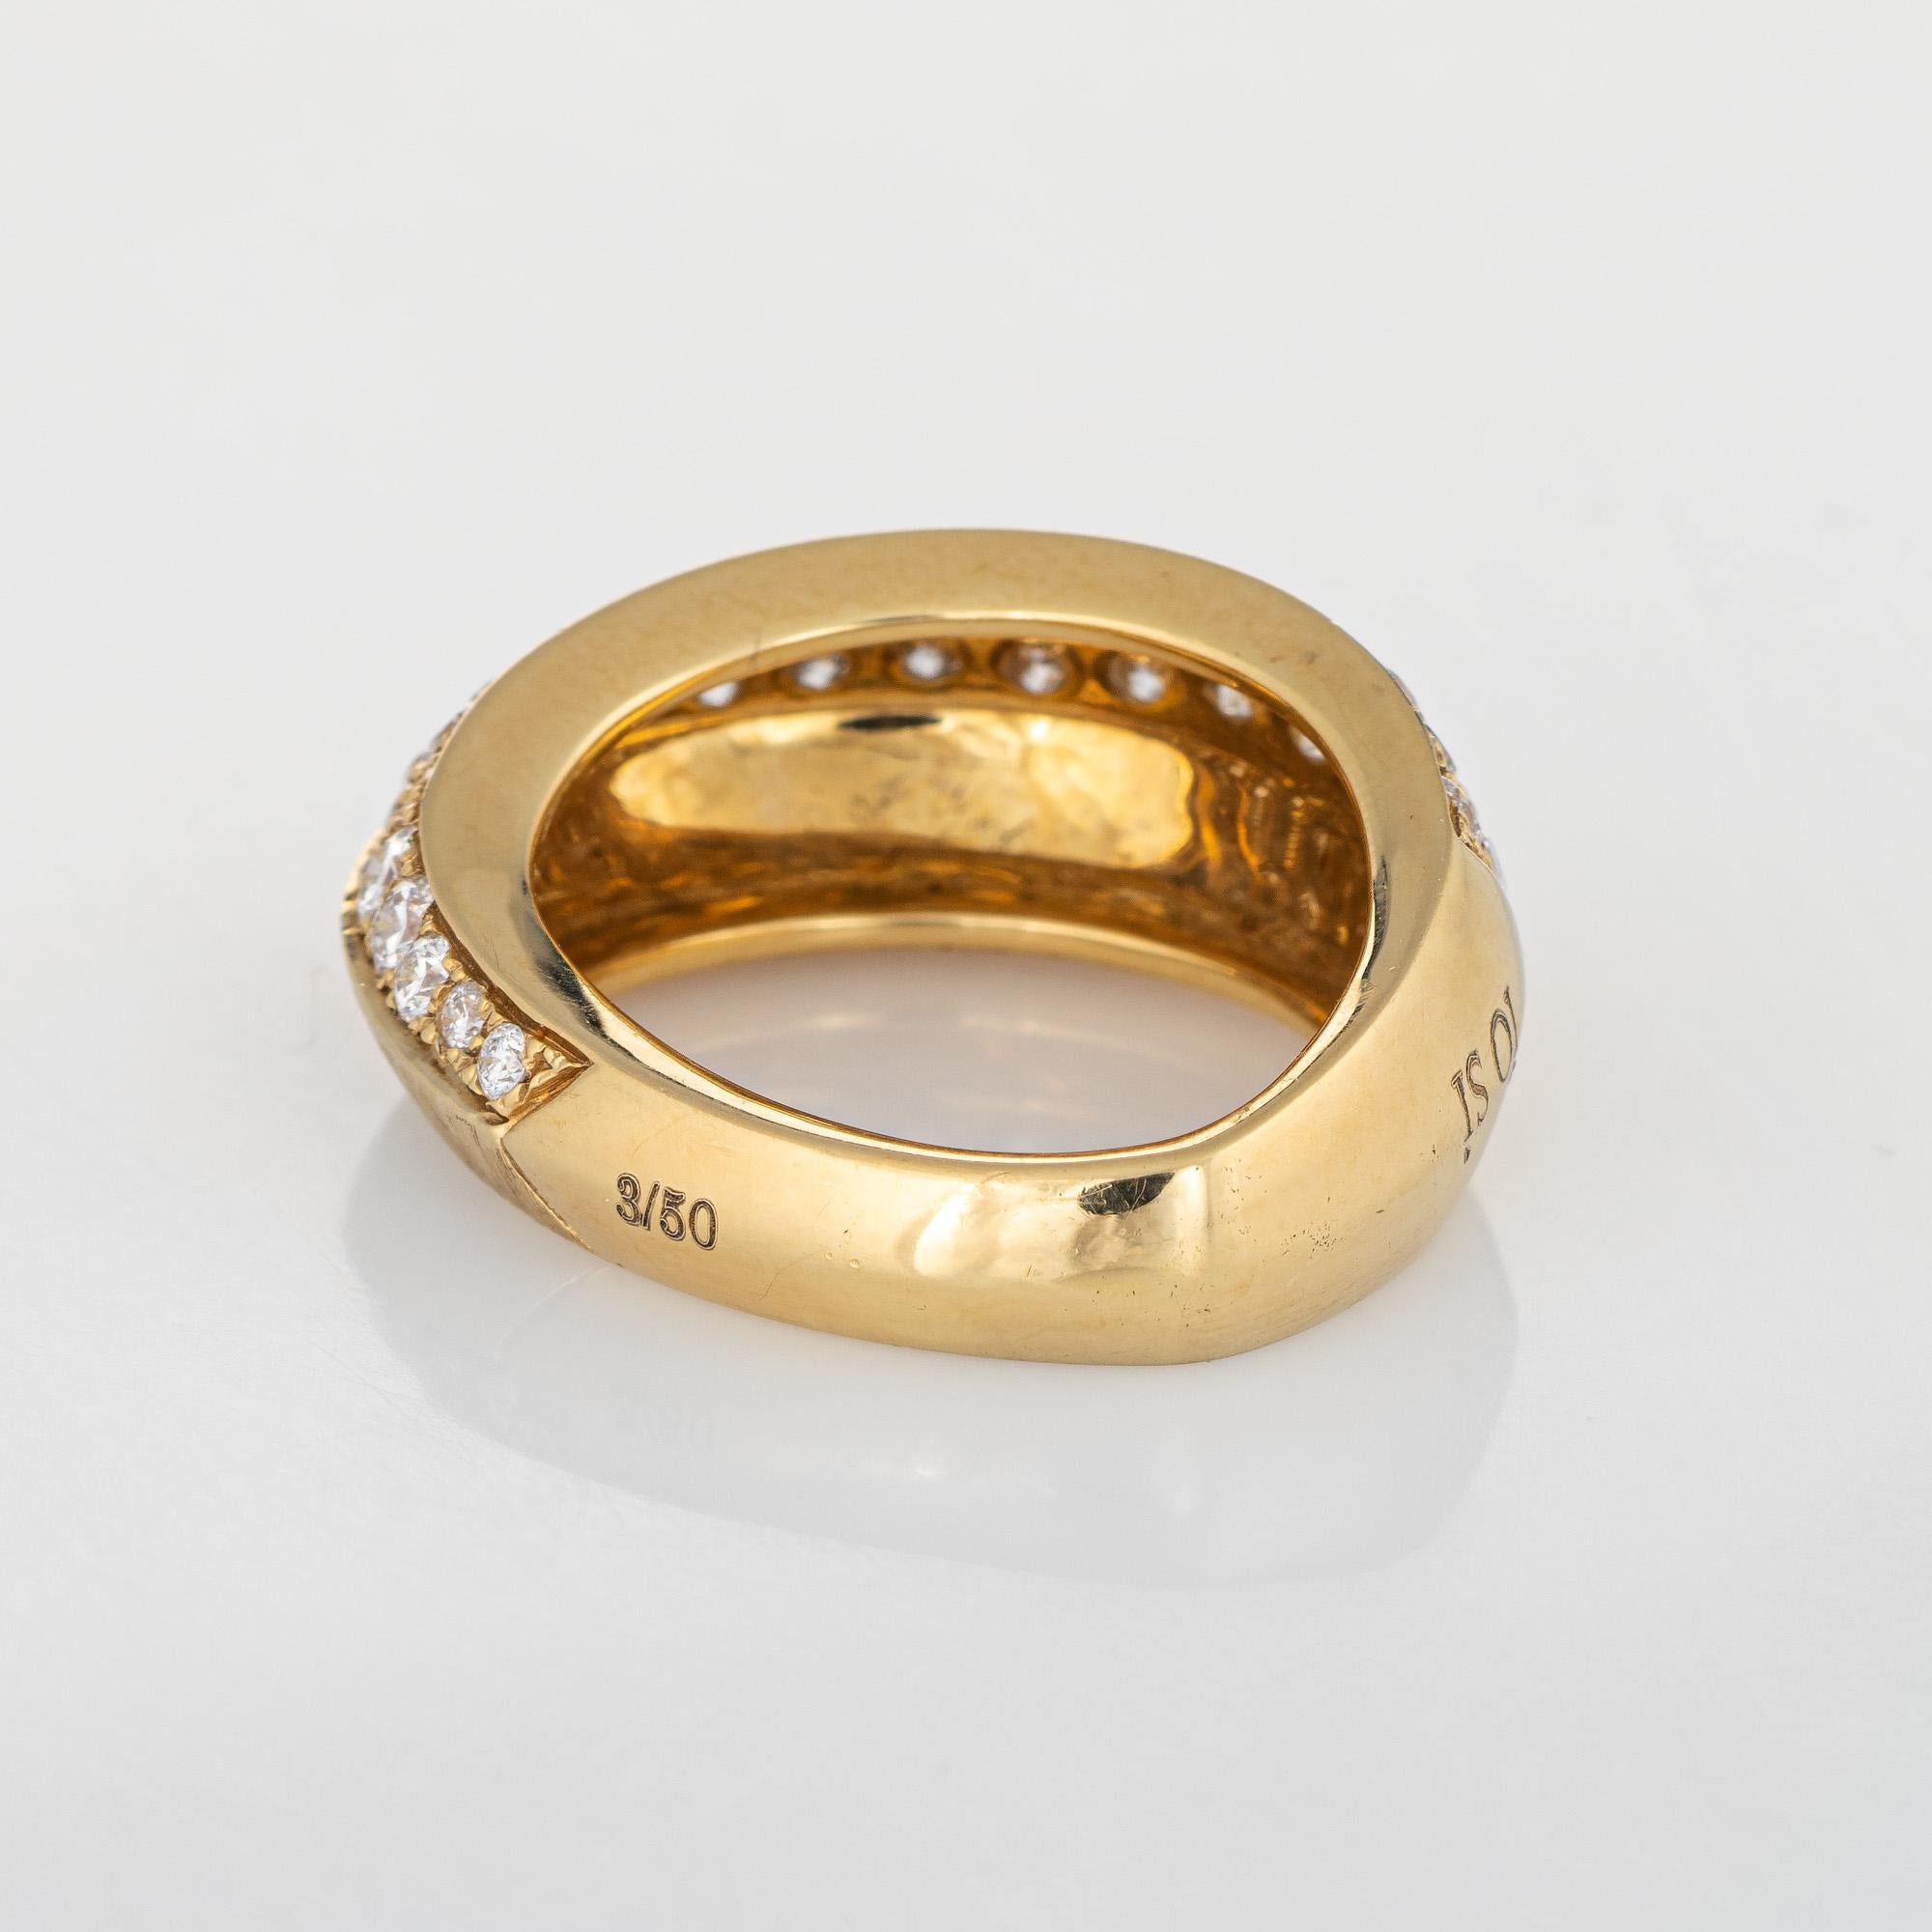 Io Si Diamond Pointed Band 1.24 Carat Limited Edition 3/50 18 Karat Gold Estate In Good Condition In Torrance, CA